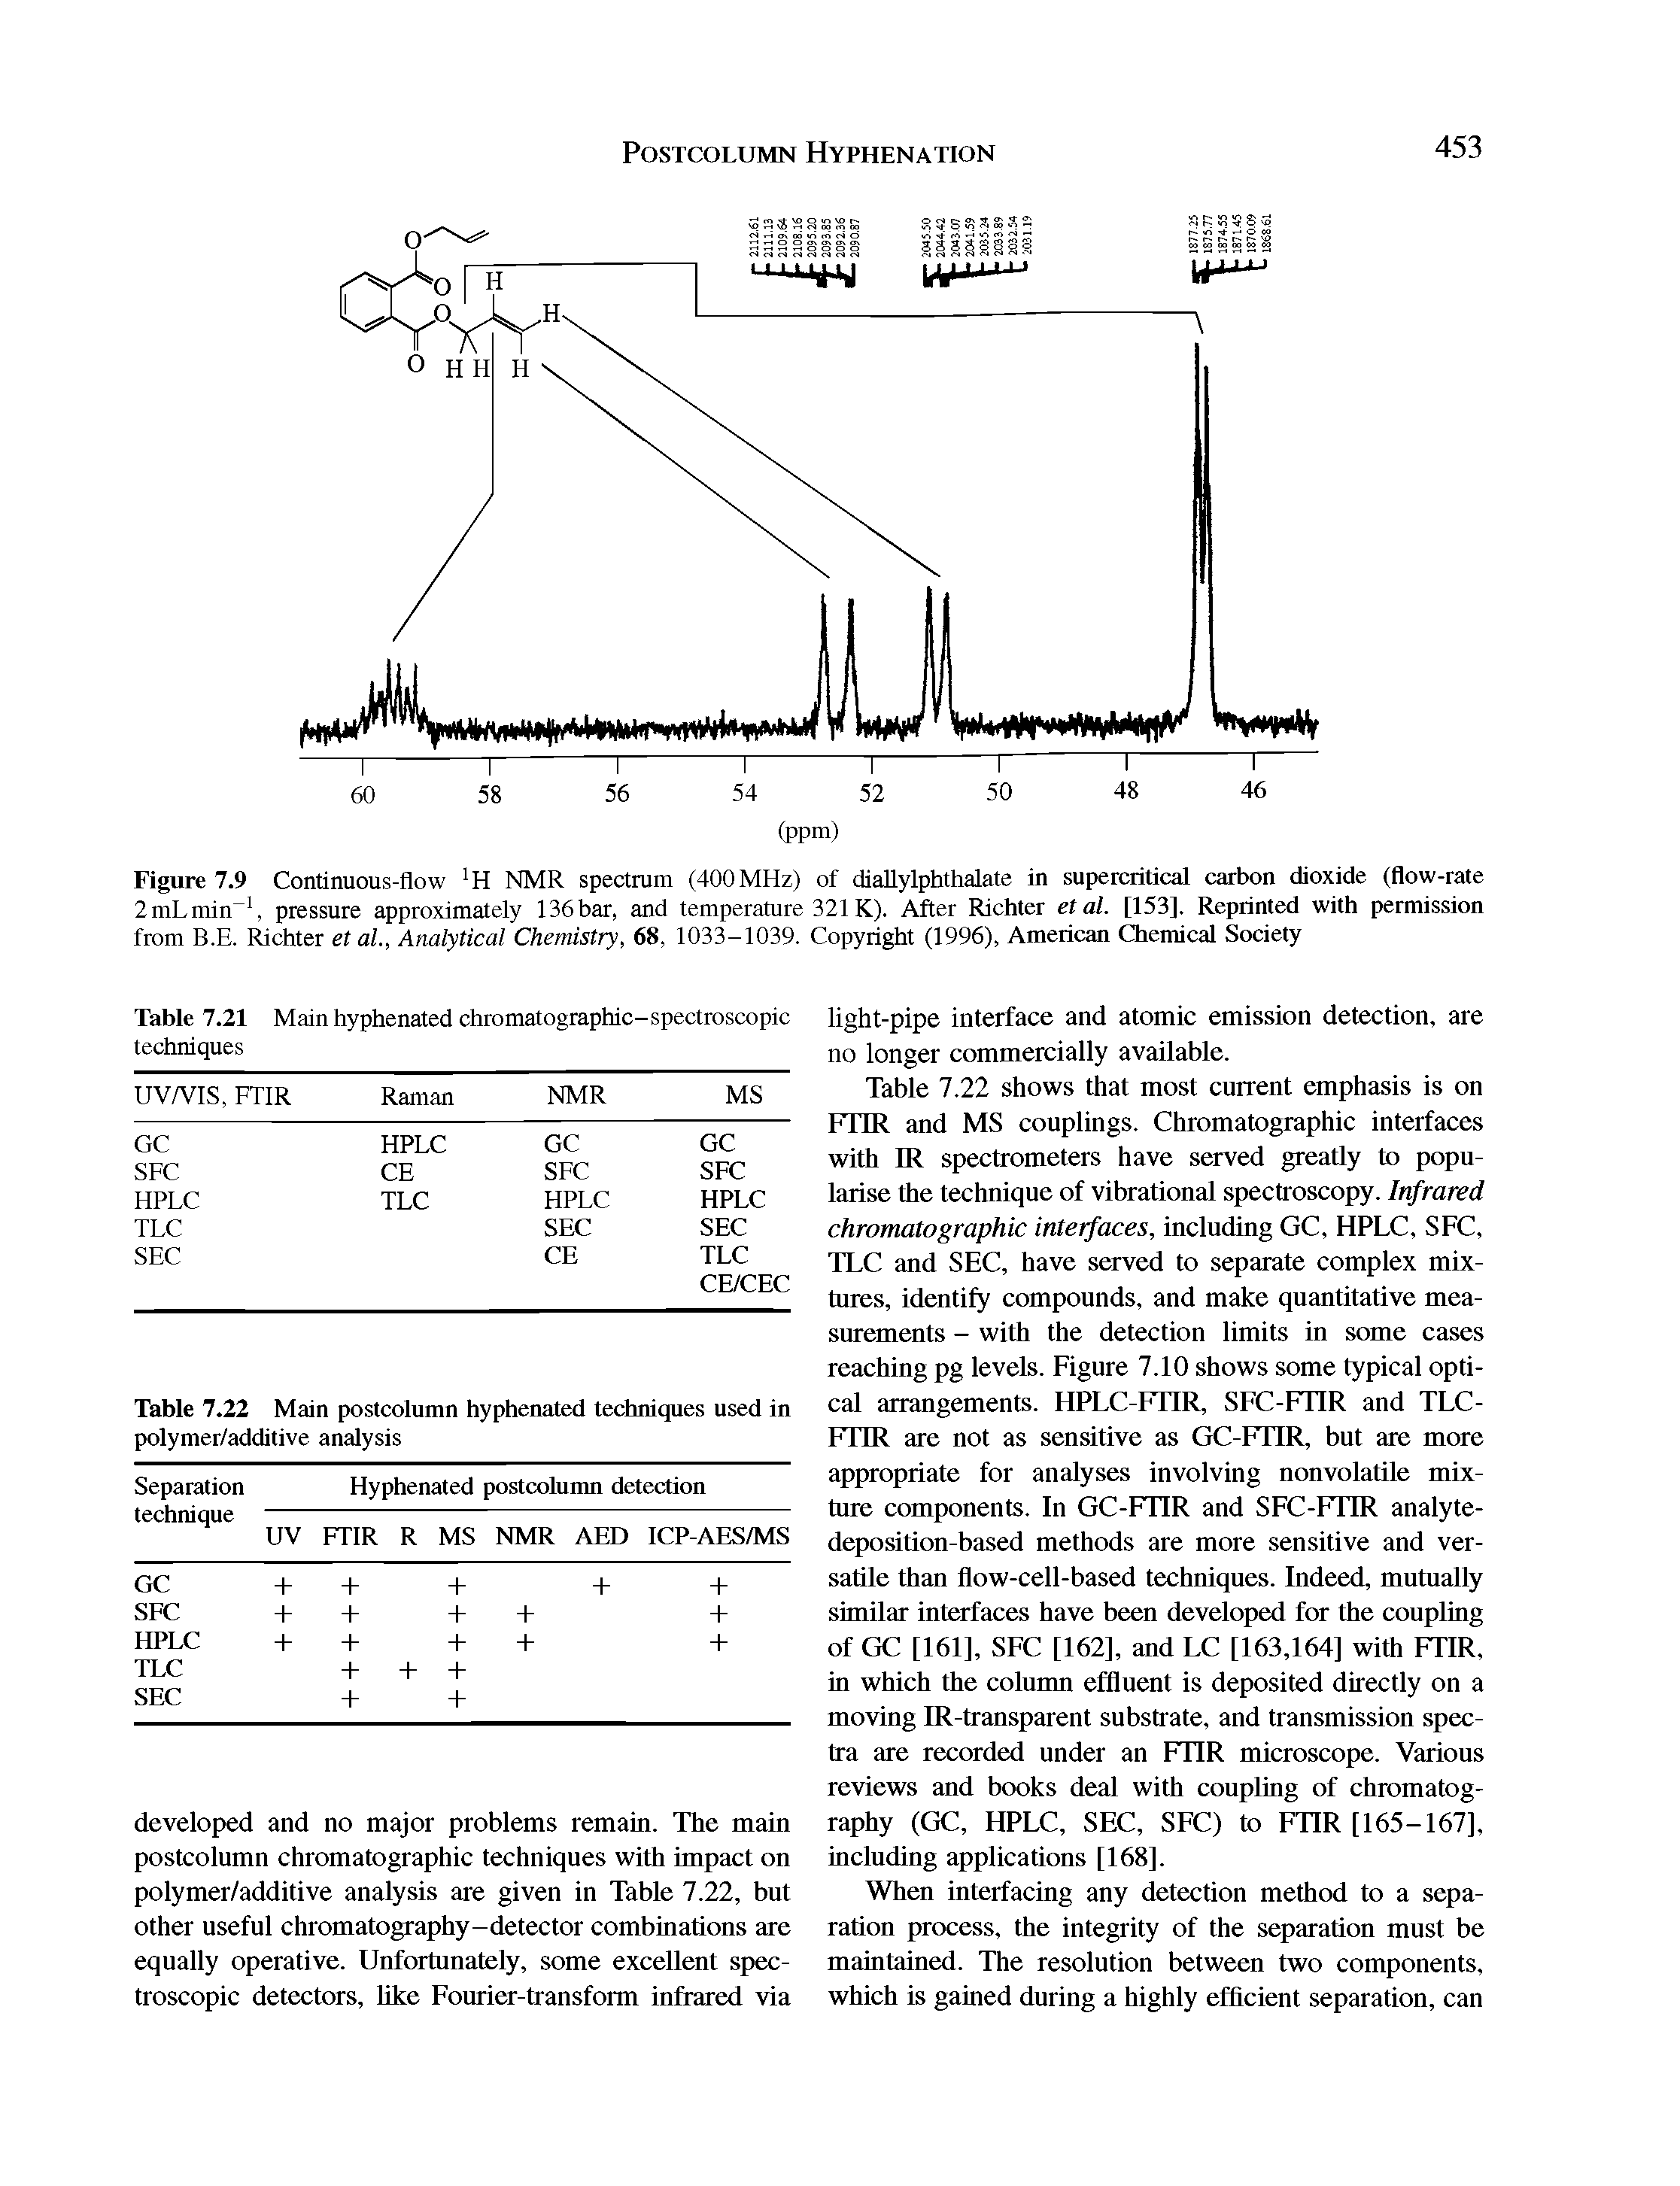 Figure 7.9 Continuous-flow H NMR spectrum (400 MHz) of diallylphthalate in supercritical carbon dioxide (flow-rate 2mLmin 1, pressure approximately 136 bar, and temperature 321 K). After Richter et al. [153]. Reprinted with permission from B.E. Richter et al., Analytical Chemistry, 68, 1033-1039. Copyright (1996), American Chemical Society...